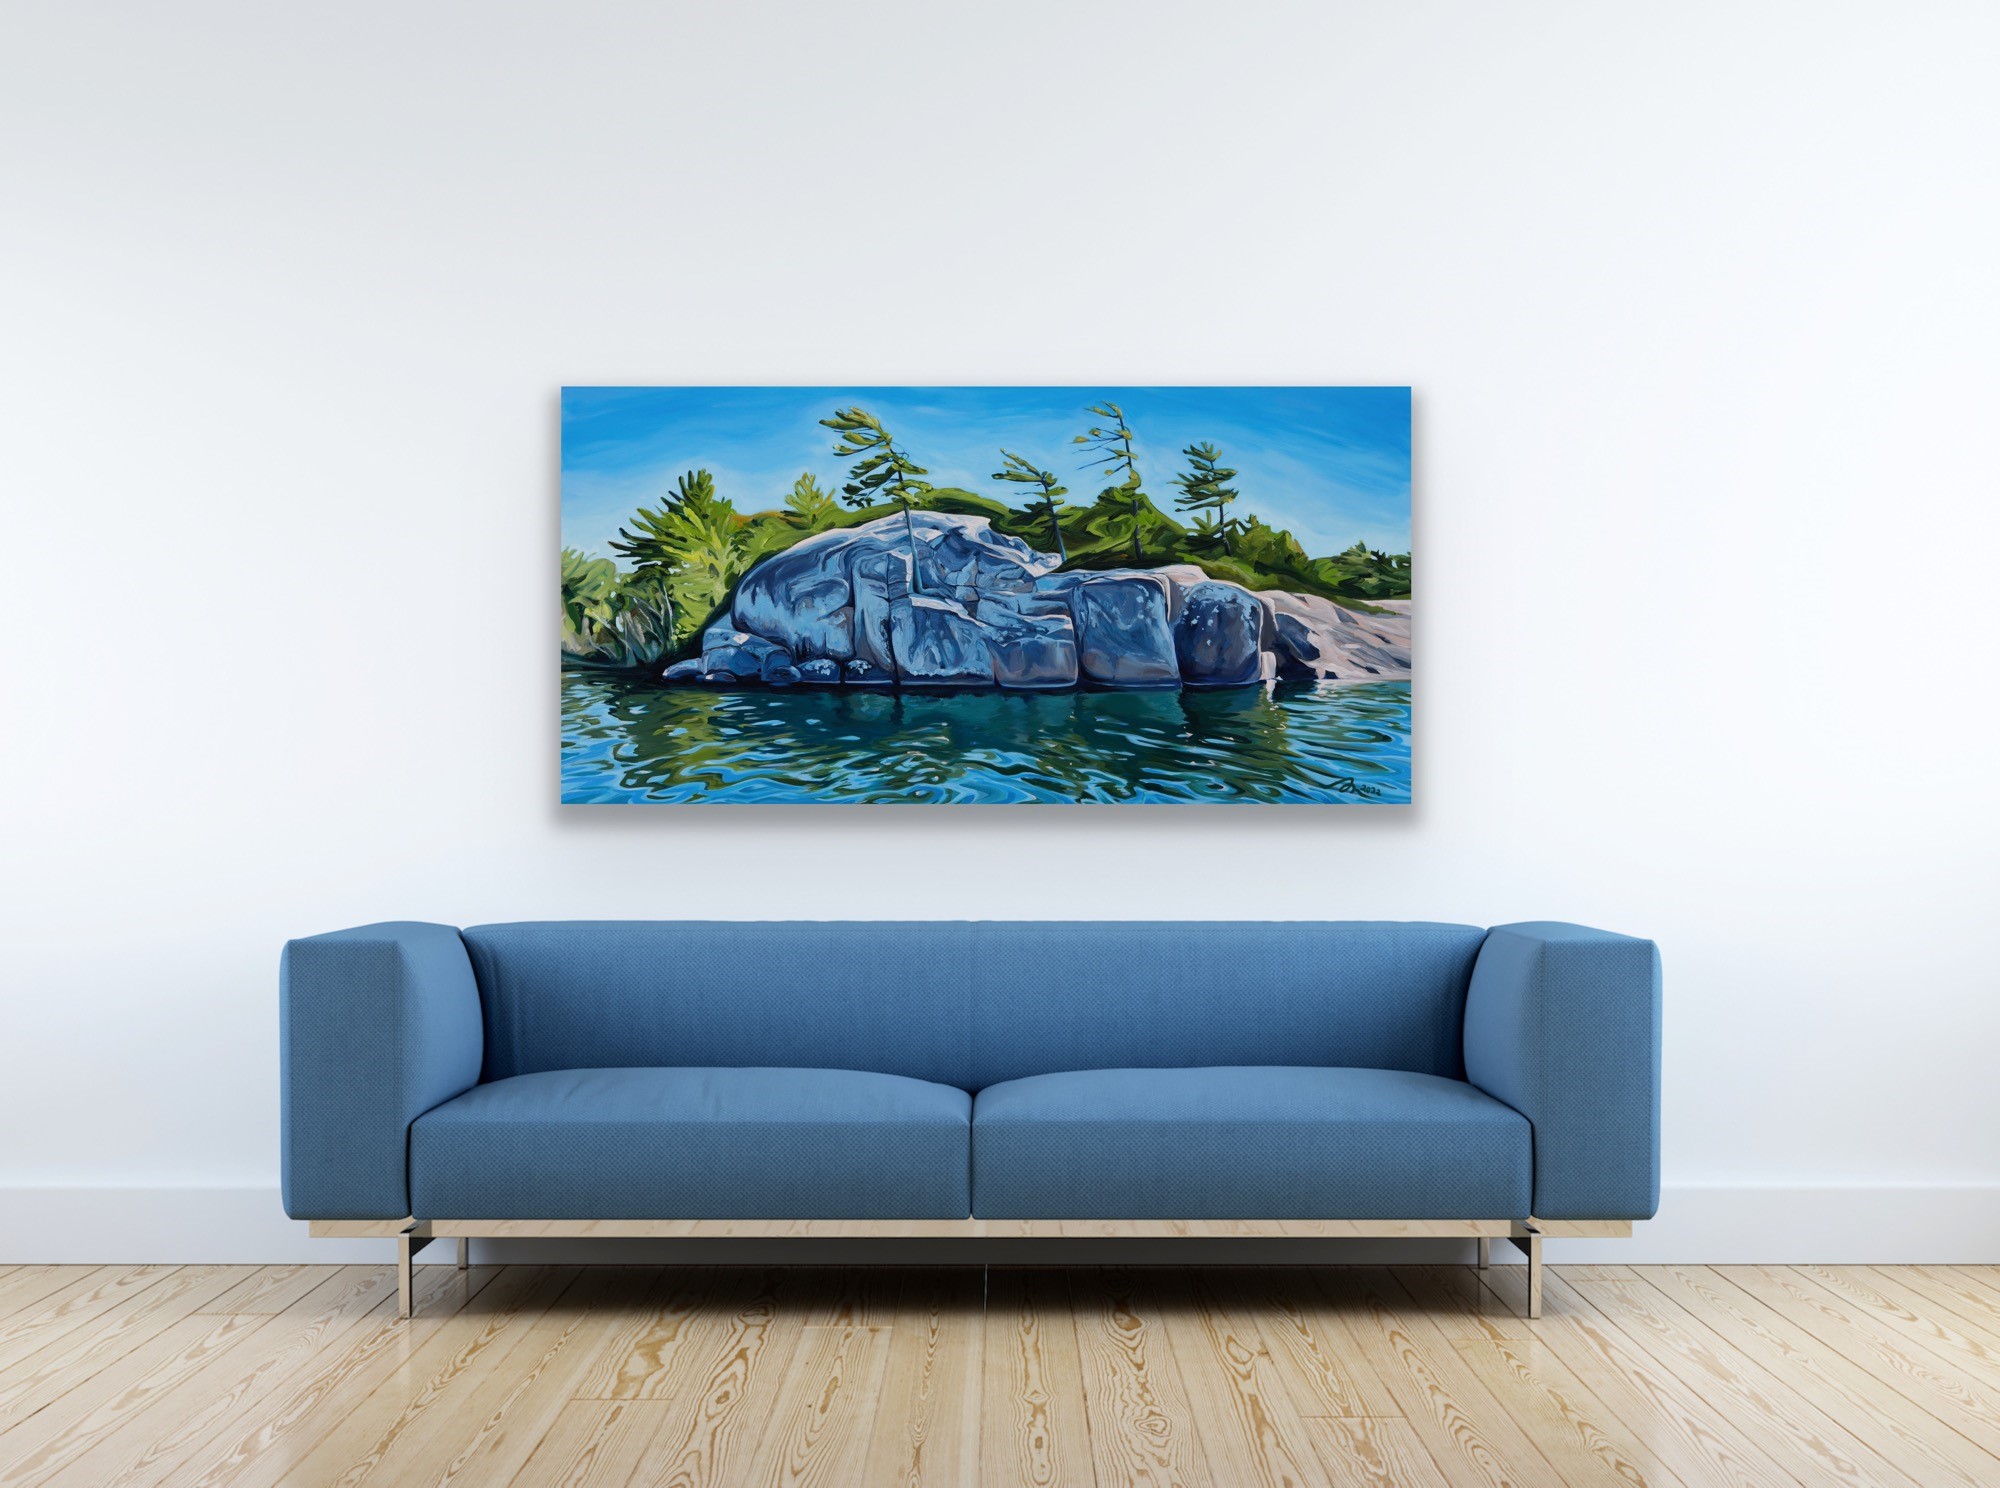 A blue couch on a light wood floor. Above hangs an original painting over Georgian Bay water, trees and rocks.